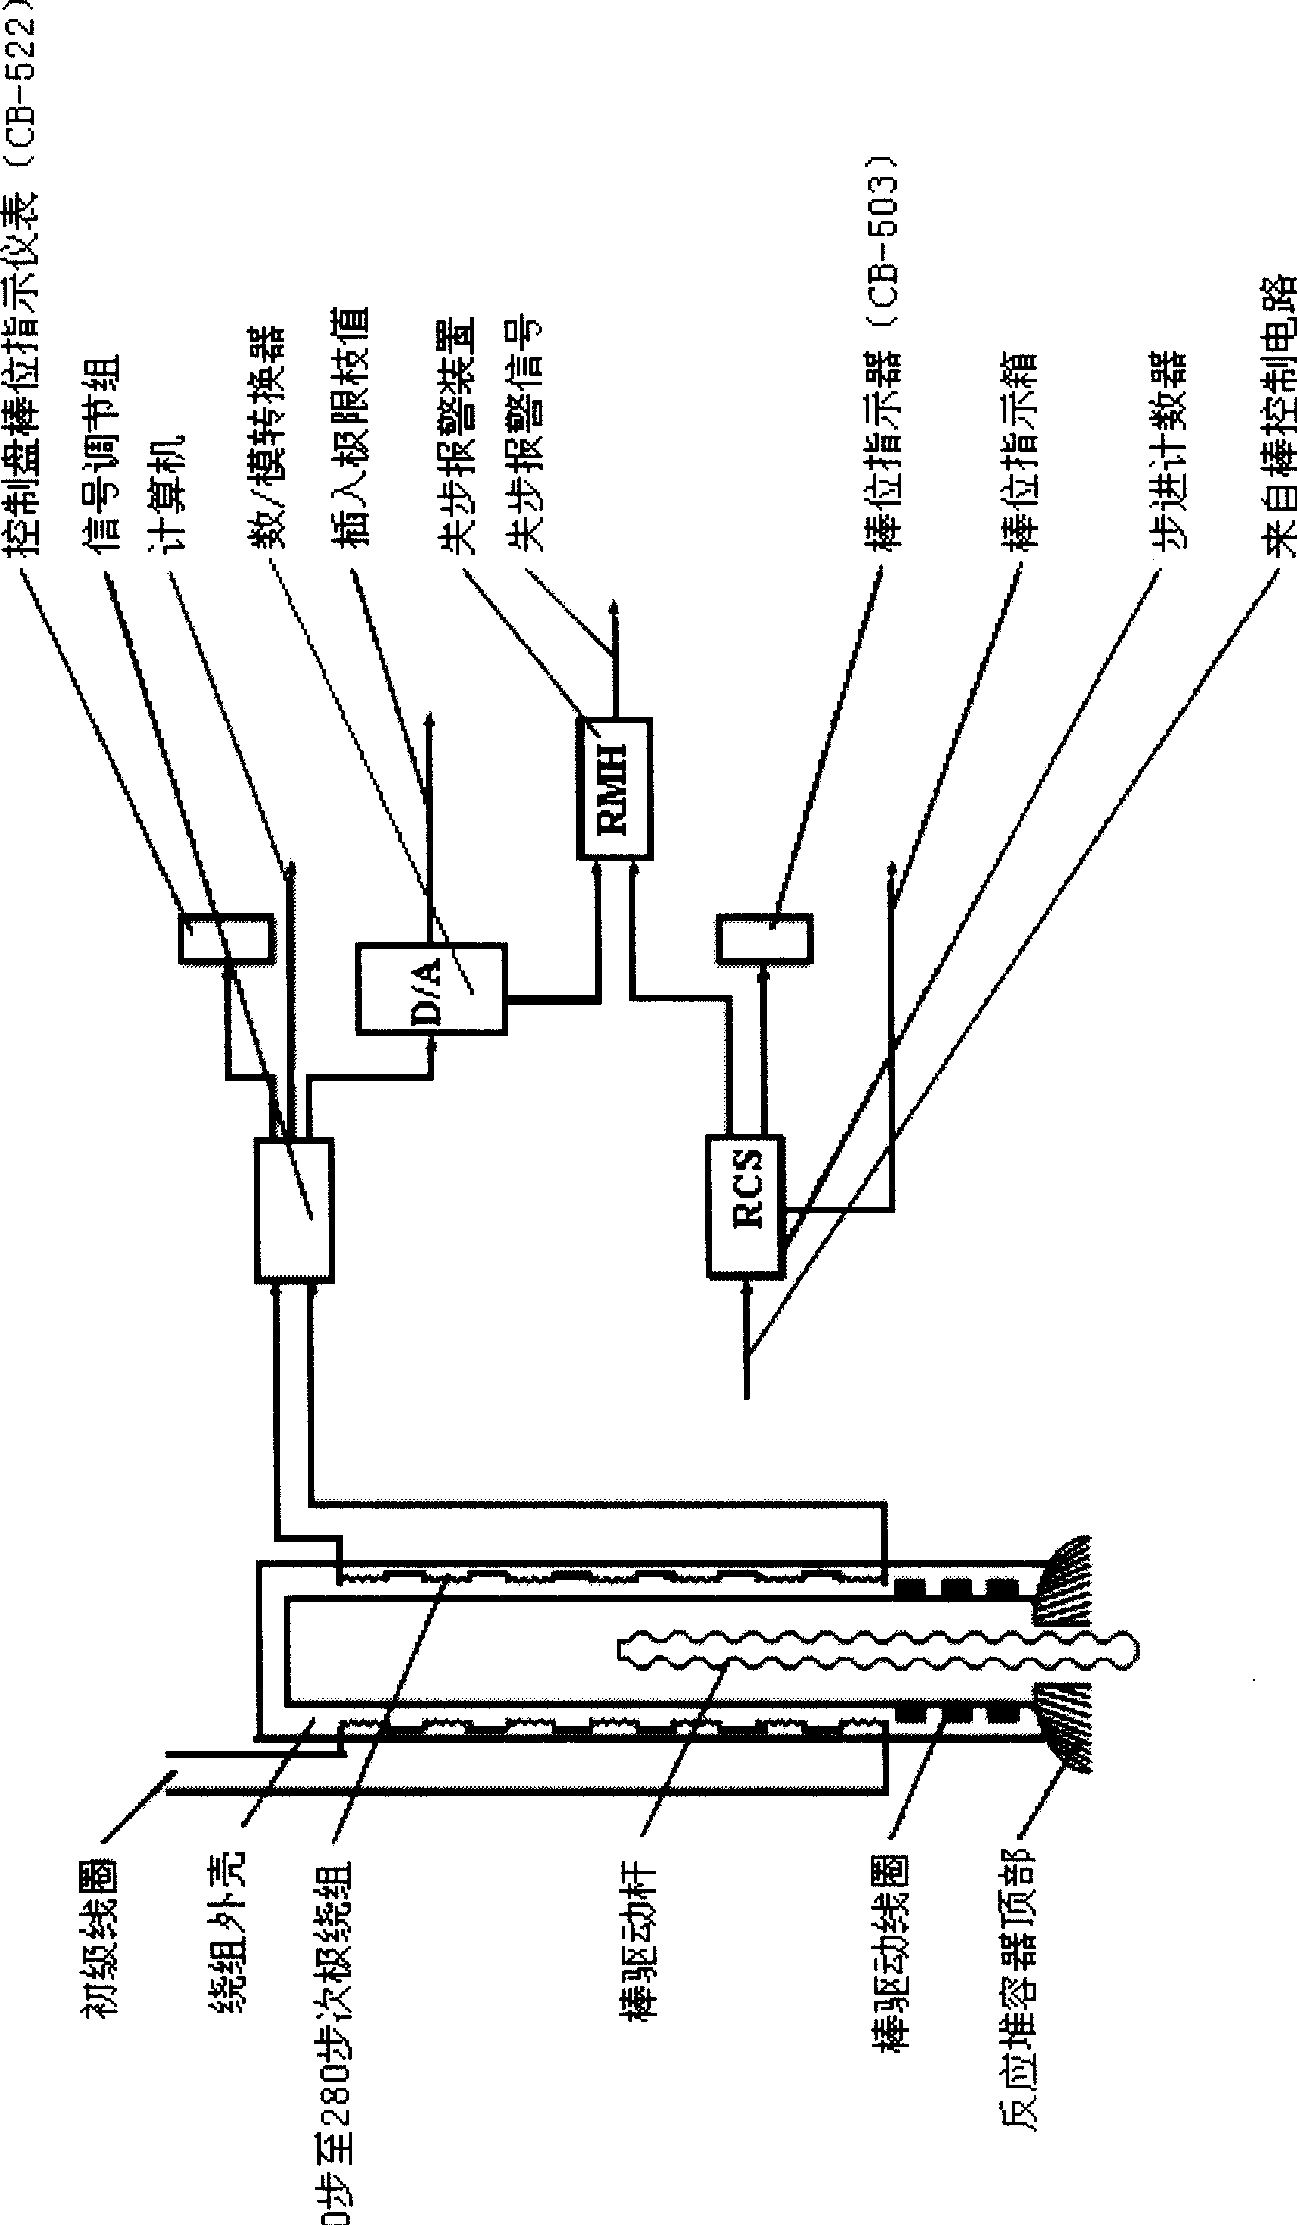 Method for integrally winding pressurized-water reactor nuclear power plant winding connectionless point stick location probe coil